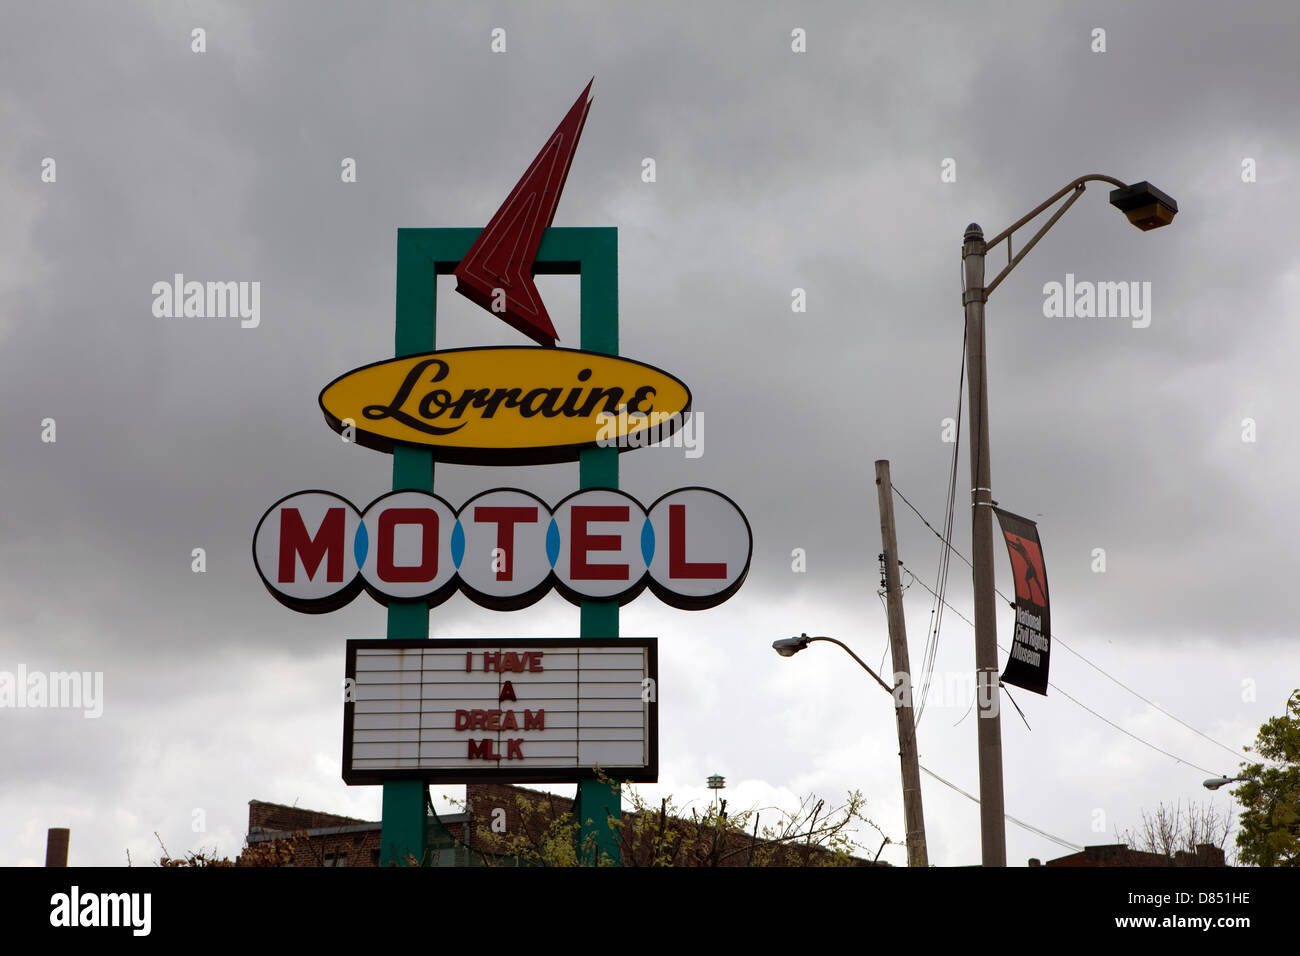 A view of the Lorraine Motel sign at he National Civil Rights Museum in Memphis, Tennessee Stock Photo